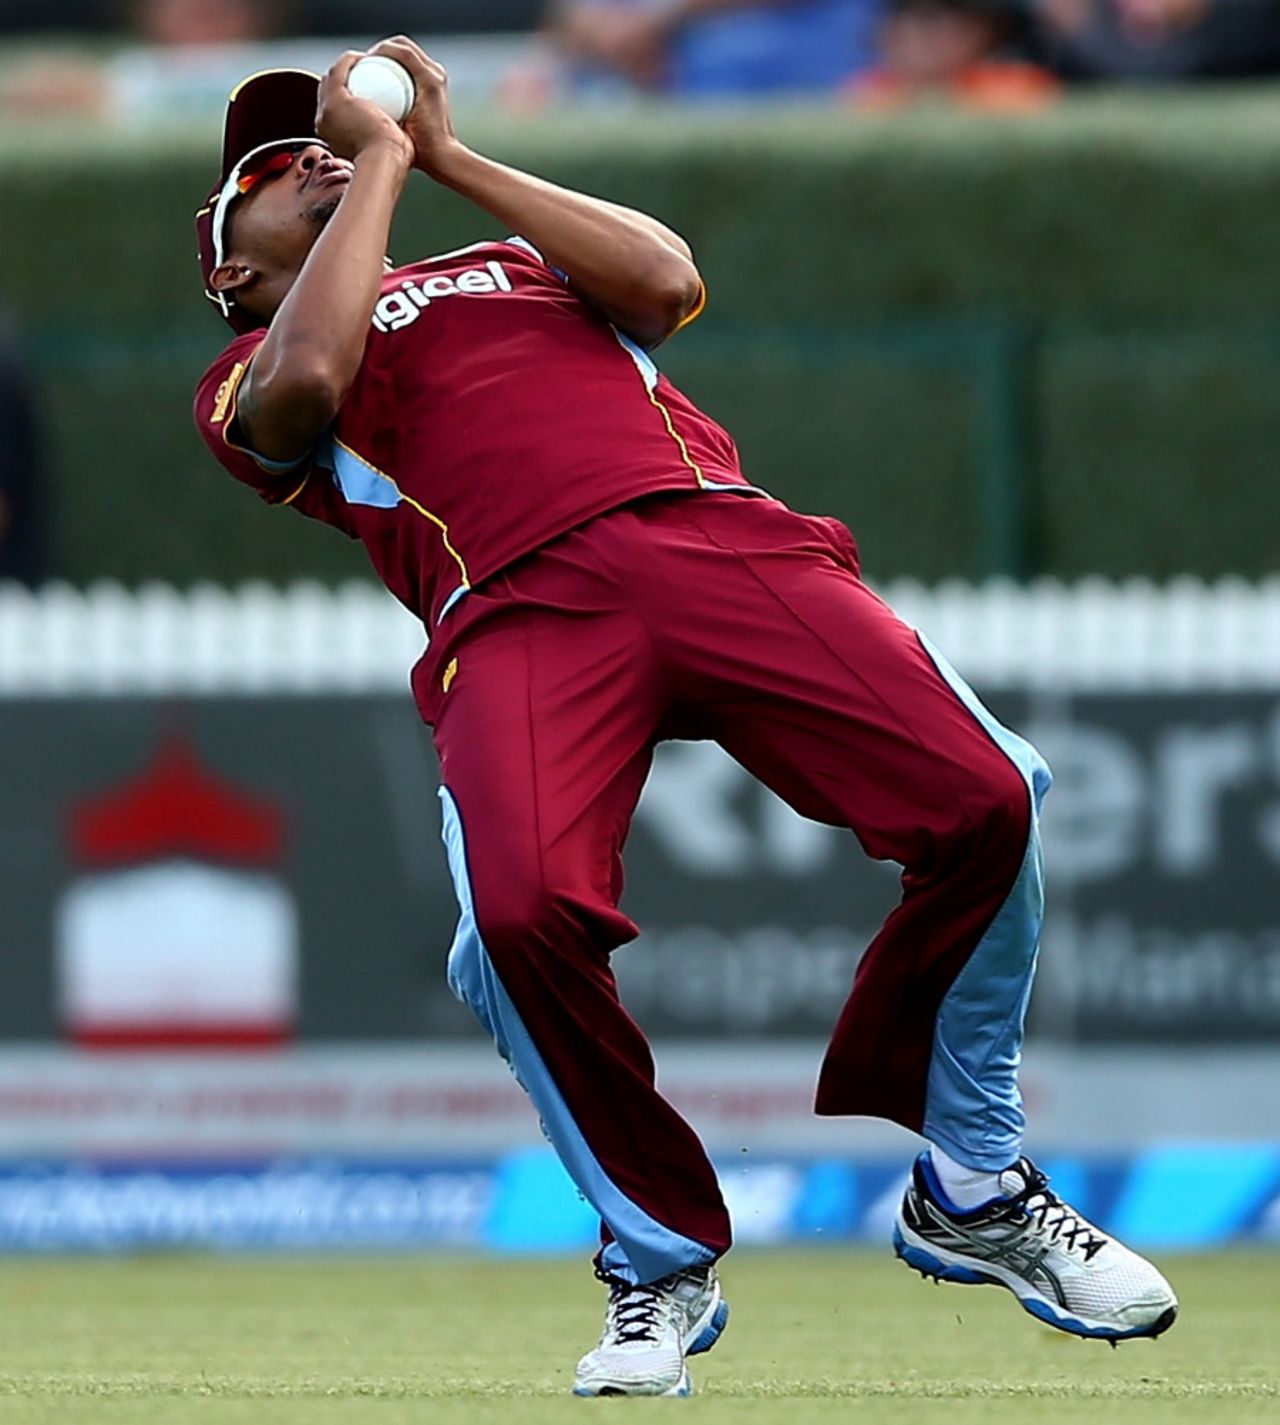 Lendl Simmons steadied himself under a high catch to remove Jesse Ryder, New Zealand v West Indies, 5th ODI, Hamilton, January 8, 2013